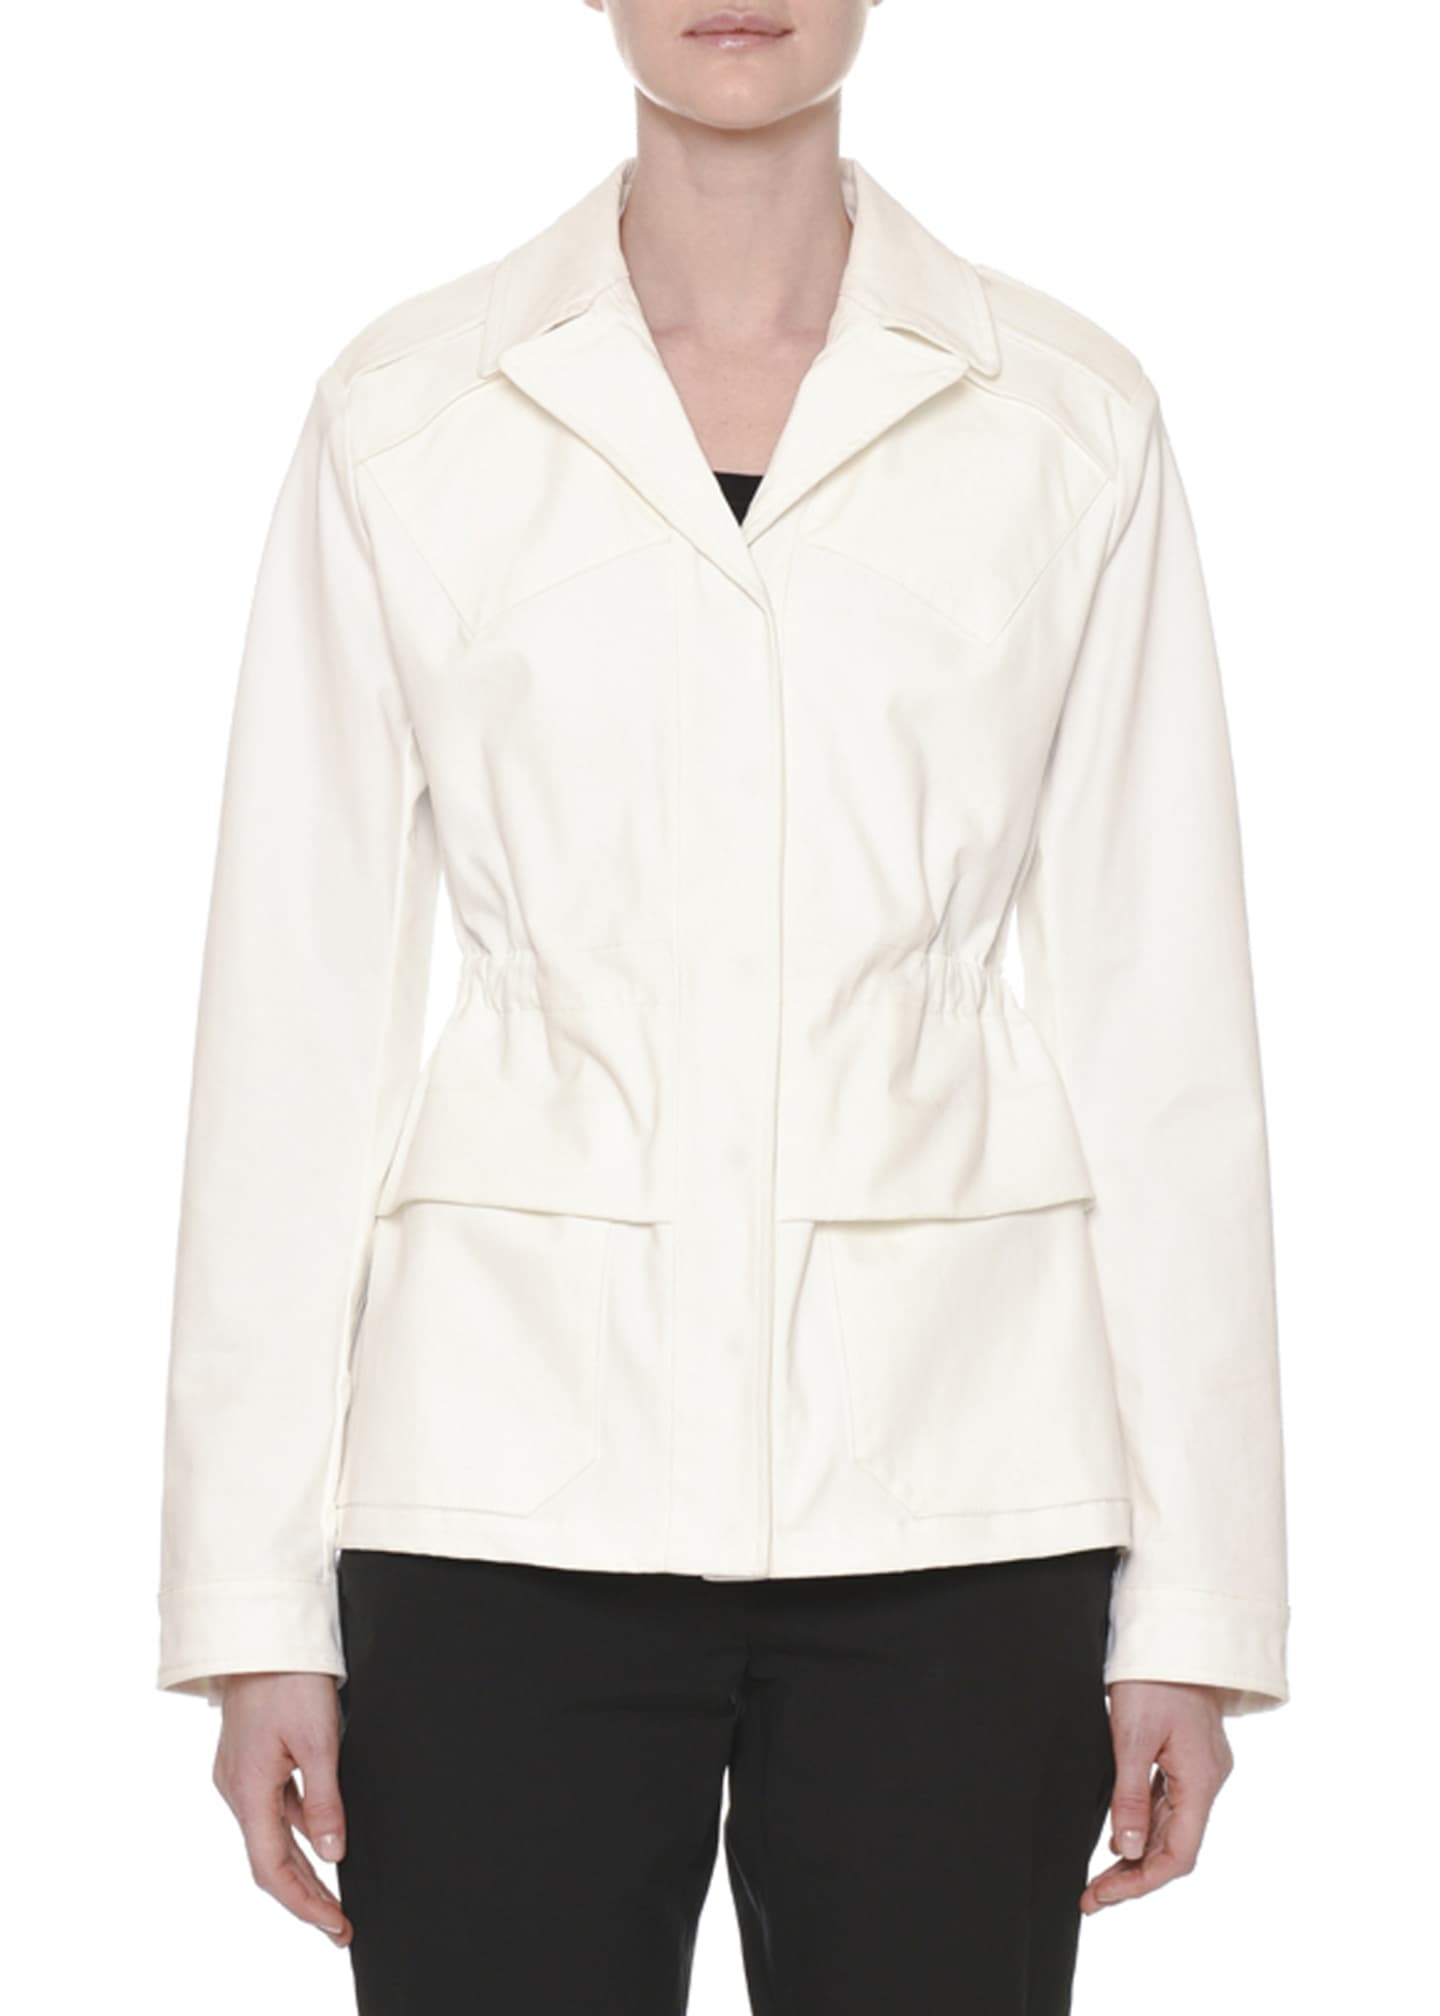 Tomas Maier Notched-Collar Button-Down Peplum Jacket Image 1 of 3